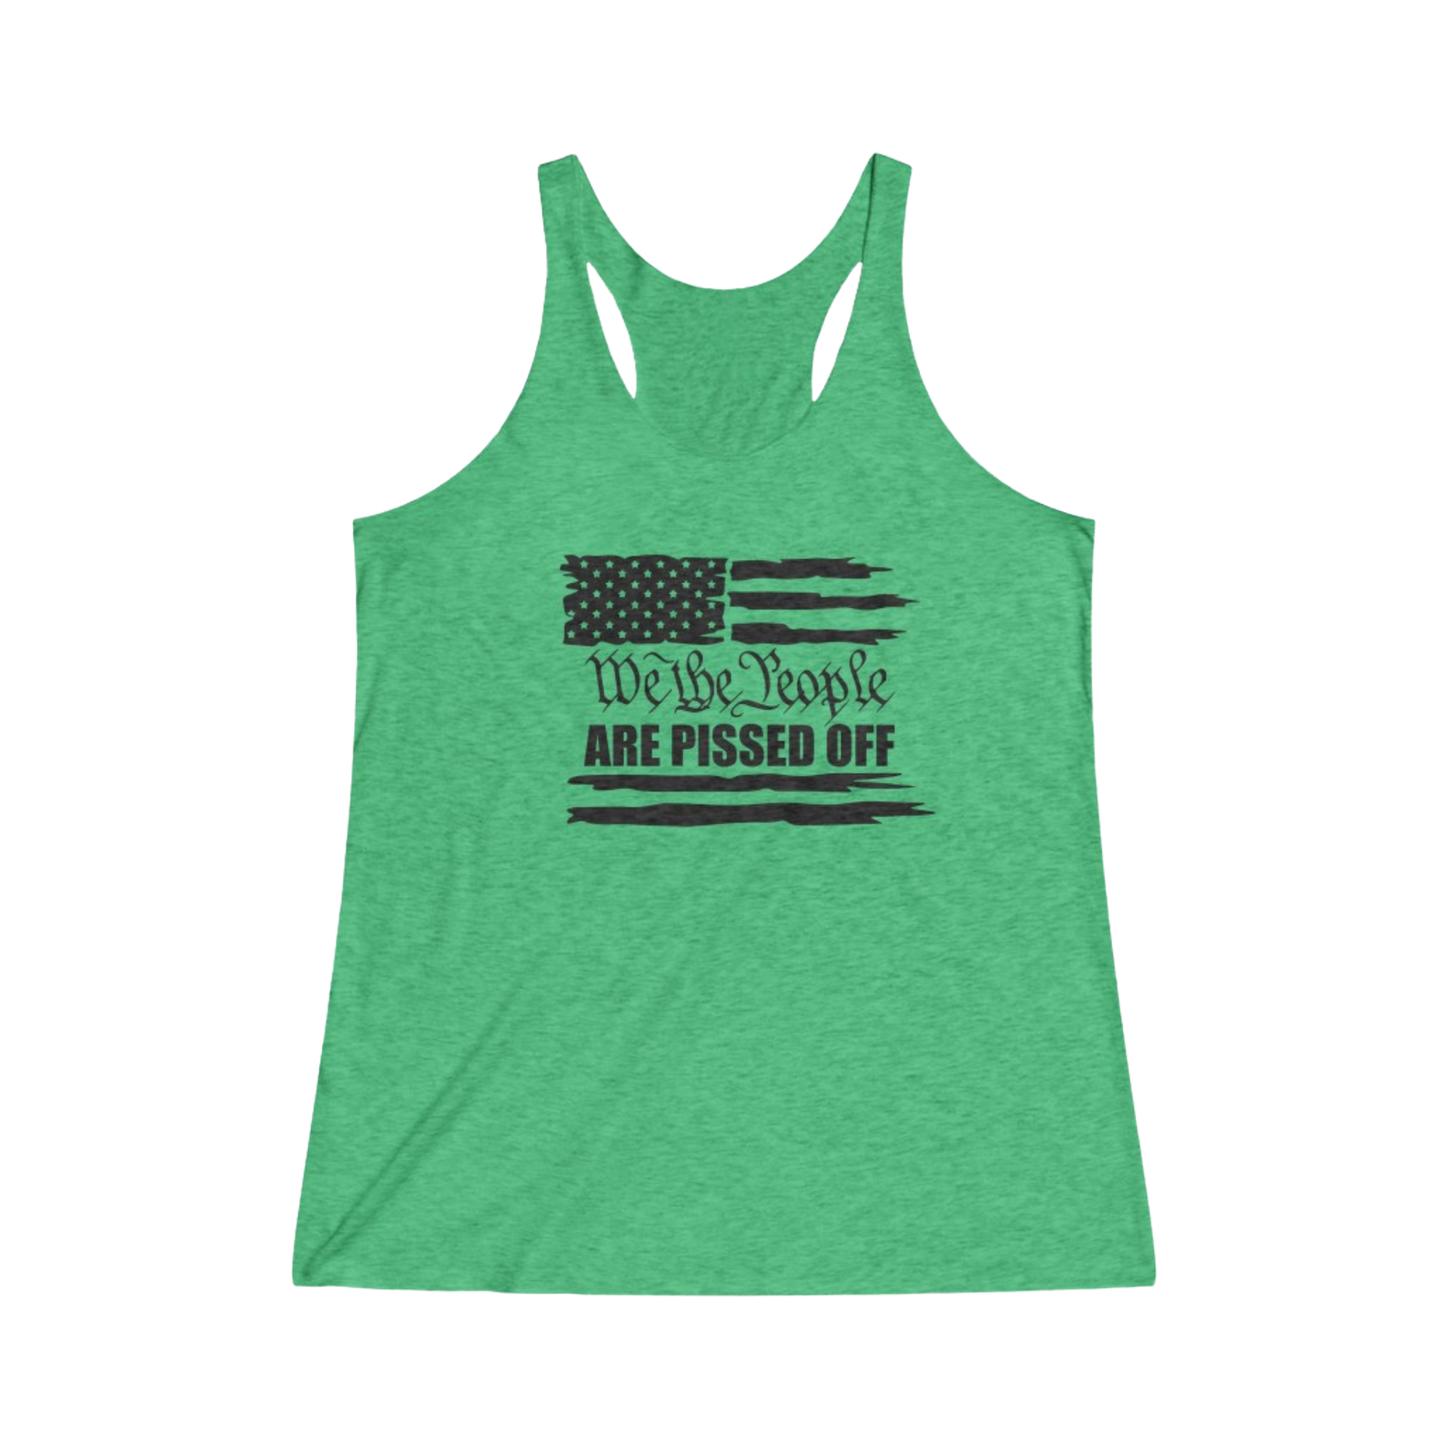 We The People Are Pissed Off Thin Racerback Tank Women's Envy - front